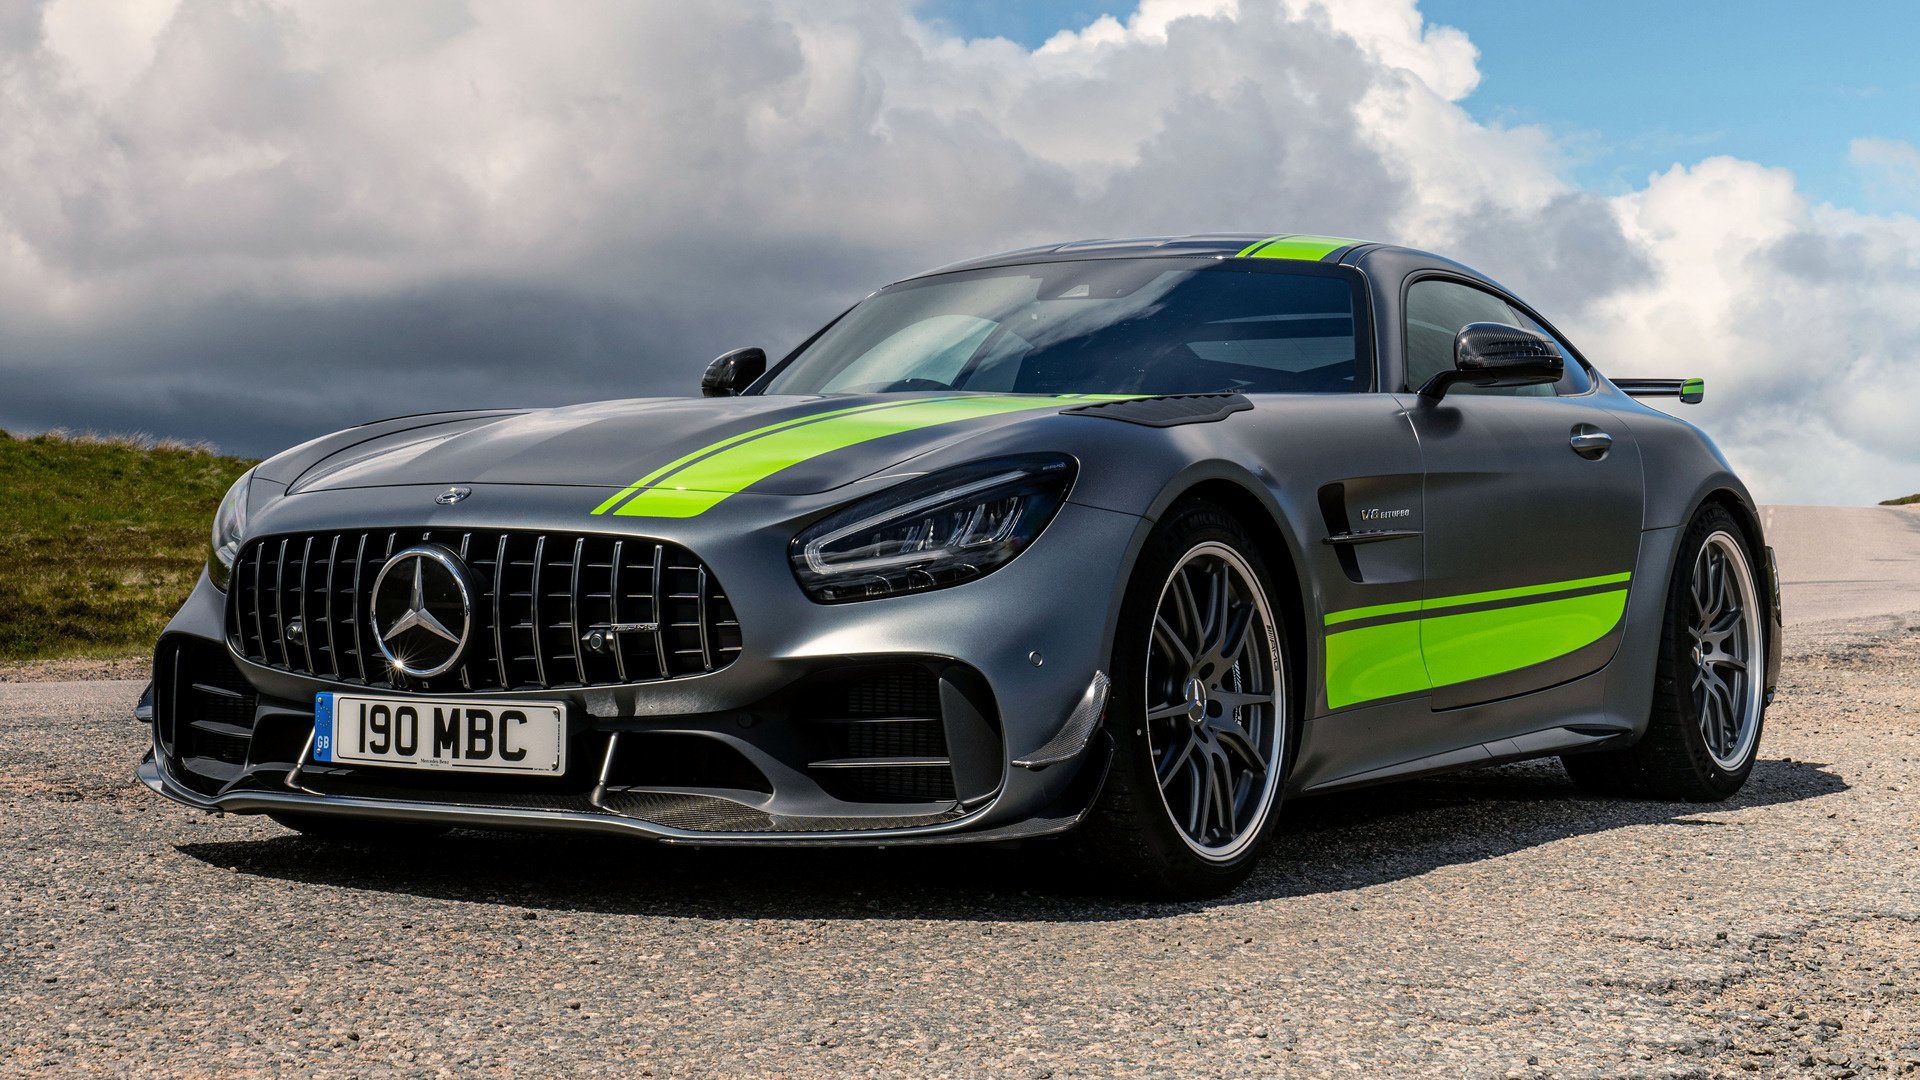 Amg Gt R Image Wallpapers